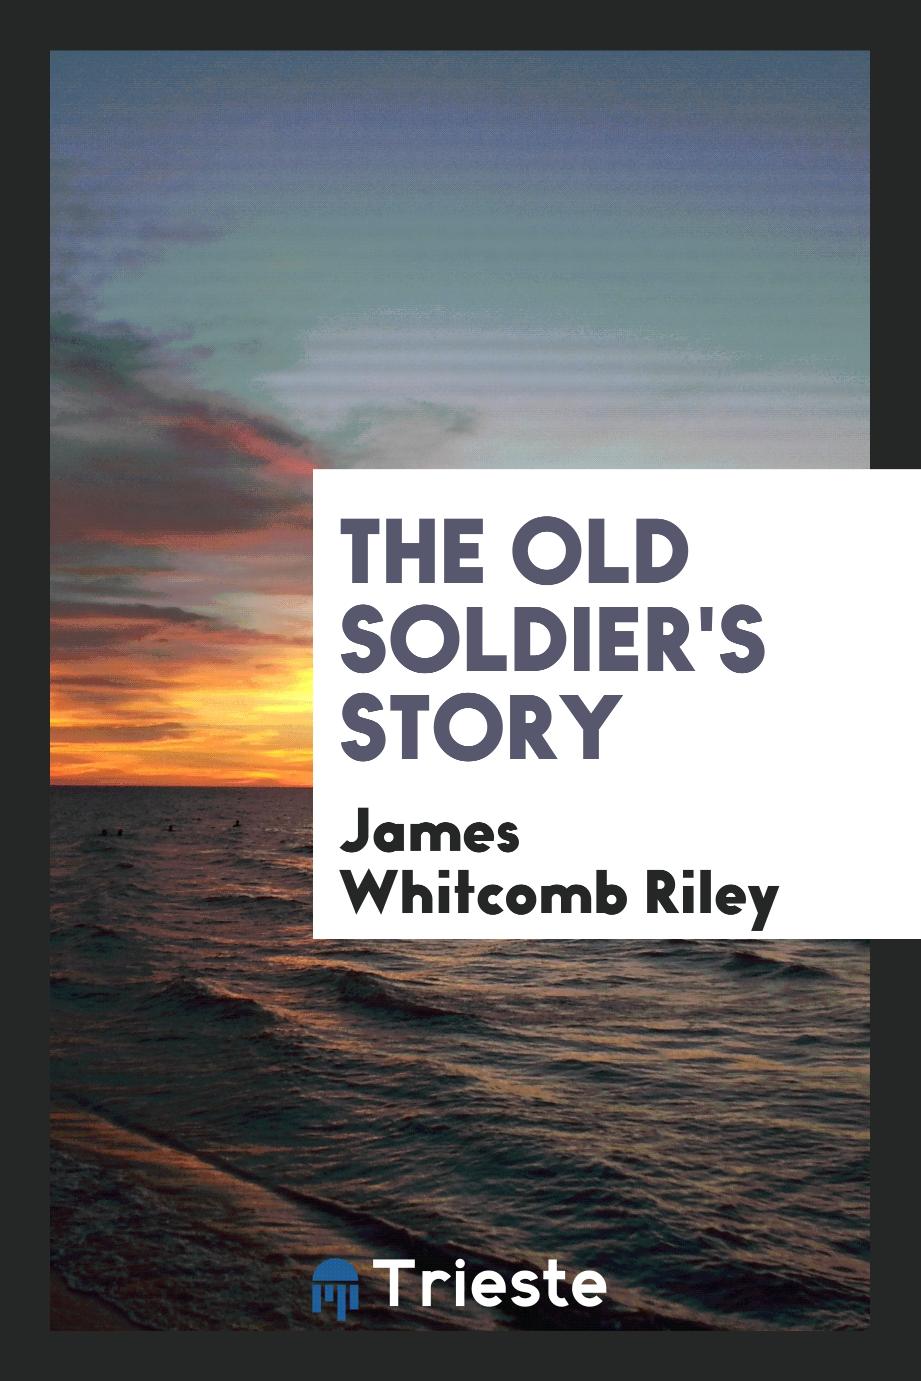 The old soldier's story